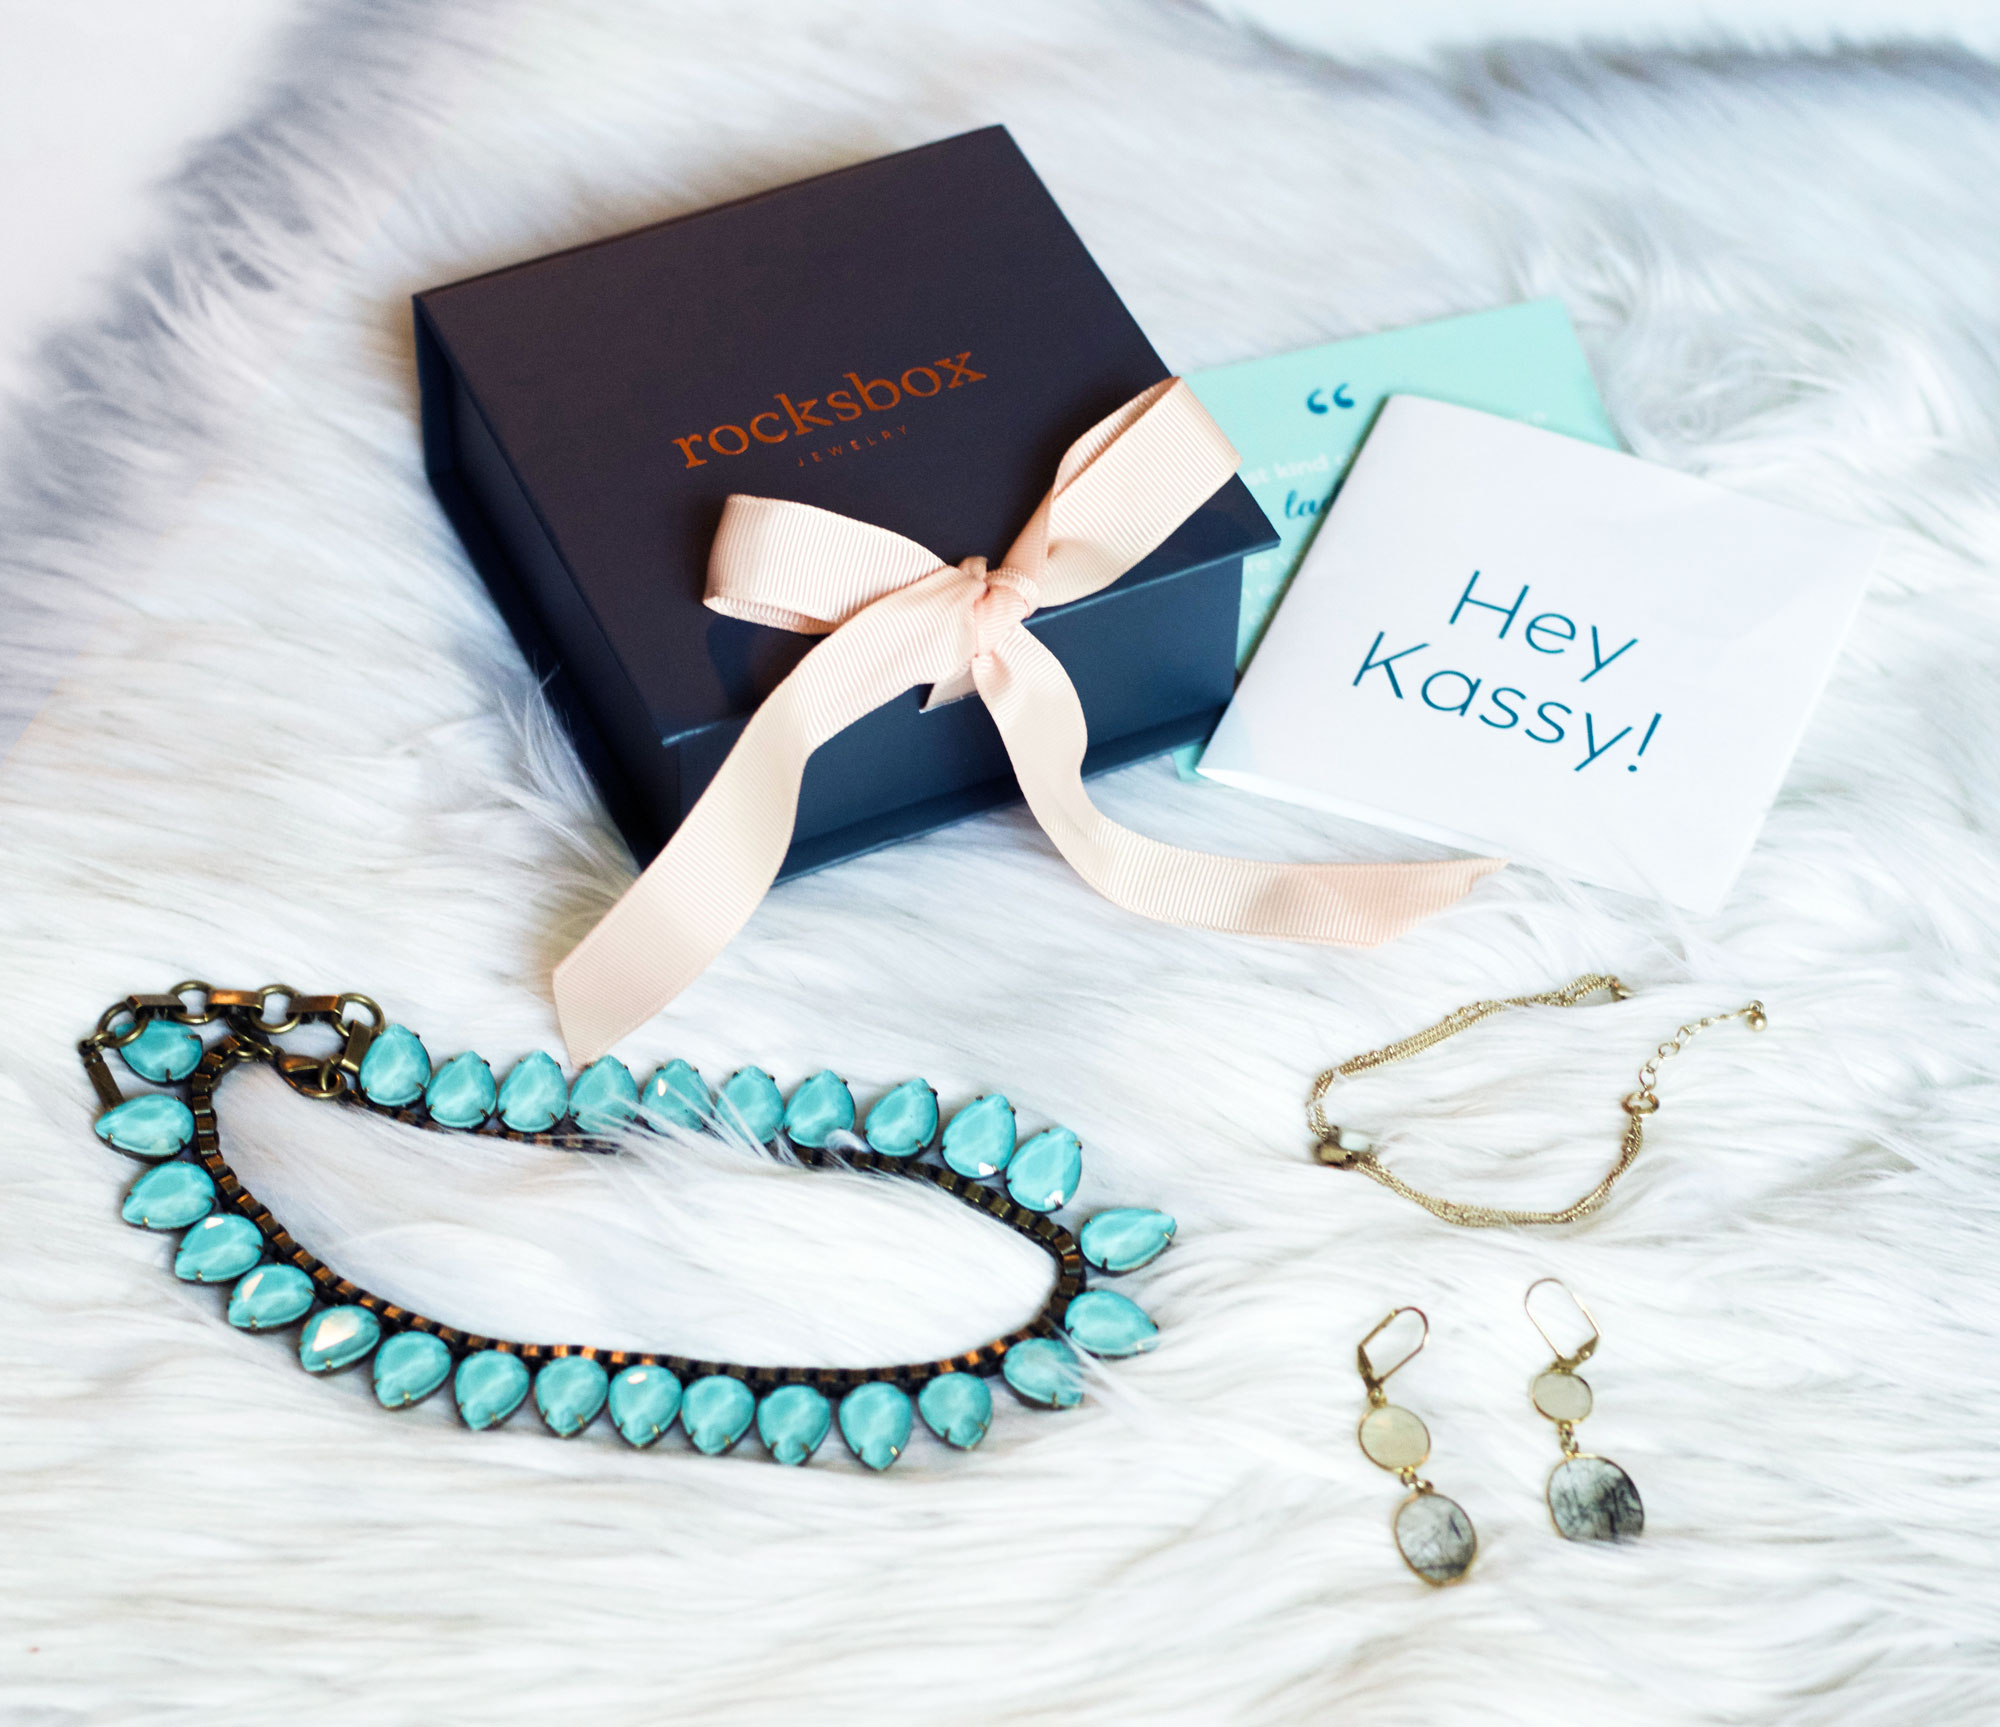 My First Rocksbox Jewelry Set! Get your own, first month FREE, by entering the code jasminehewitt51xoxo at http://rocksbox.evyy.net/c/409602/286651/4511